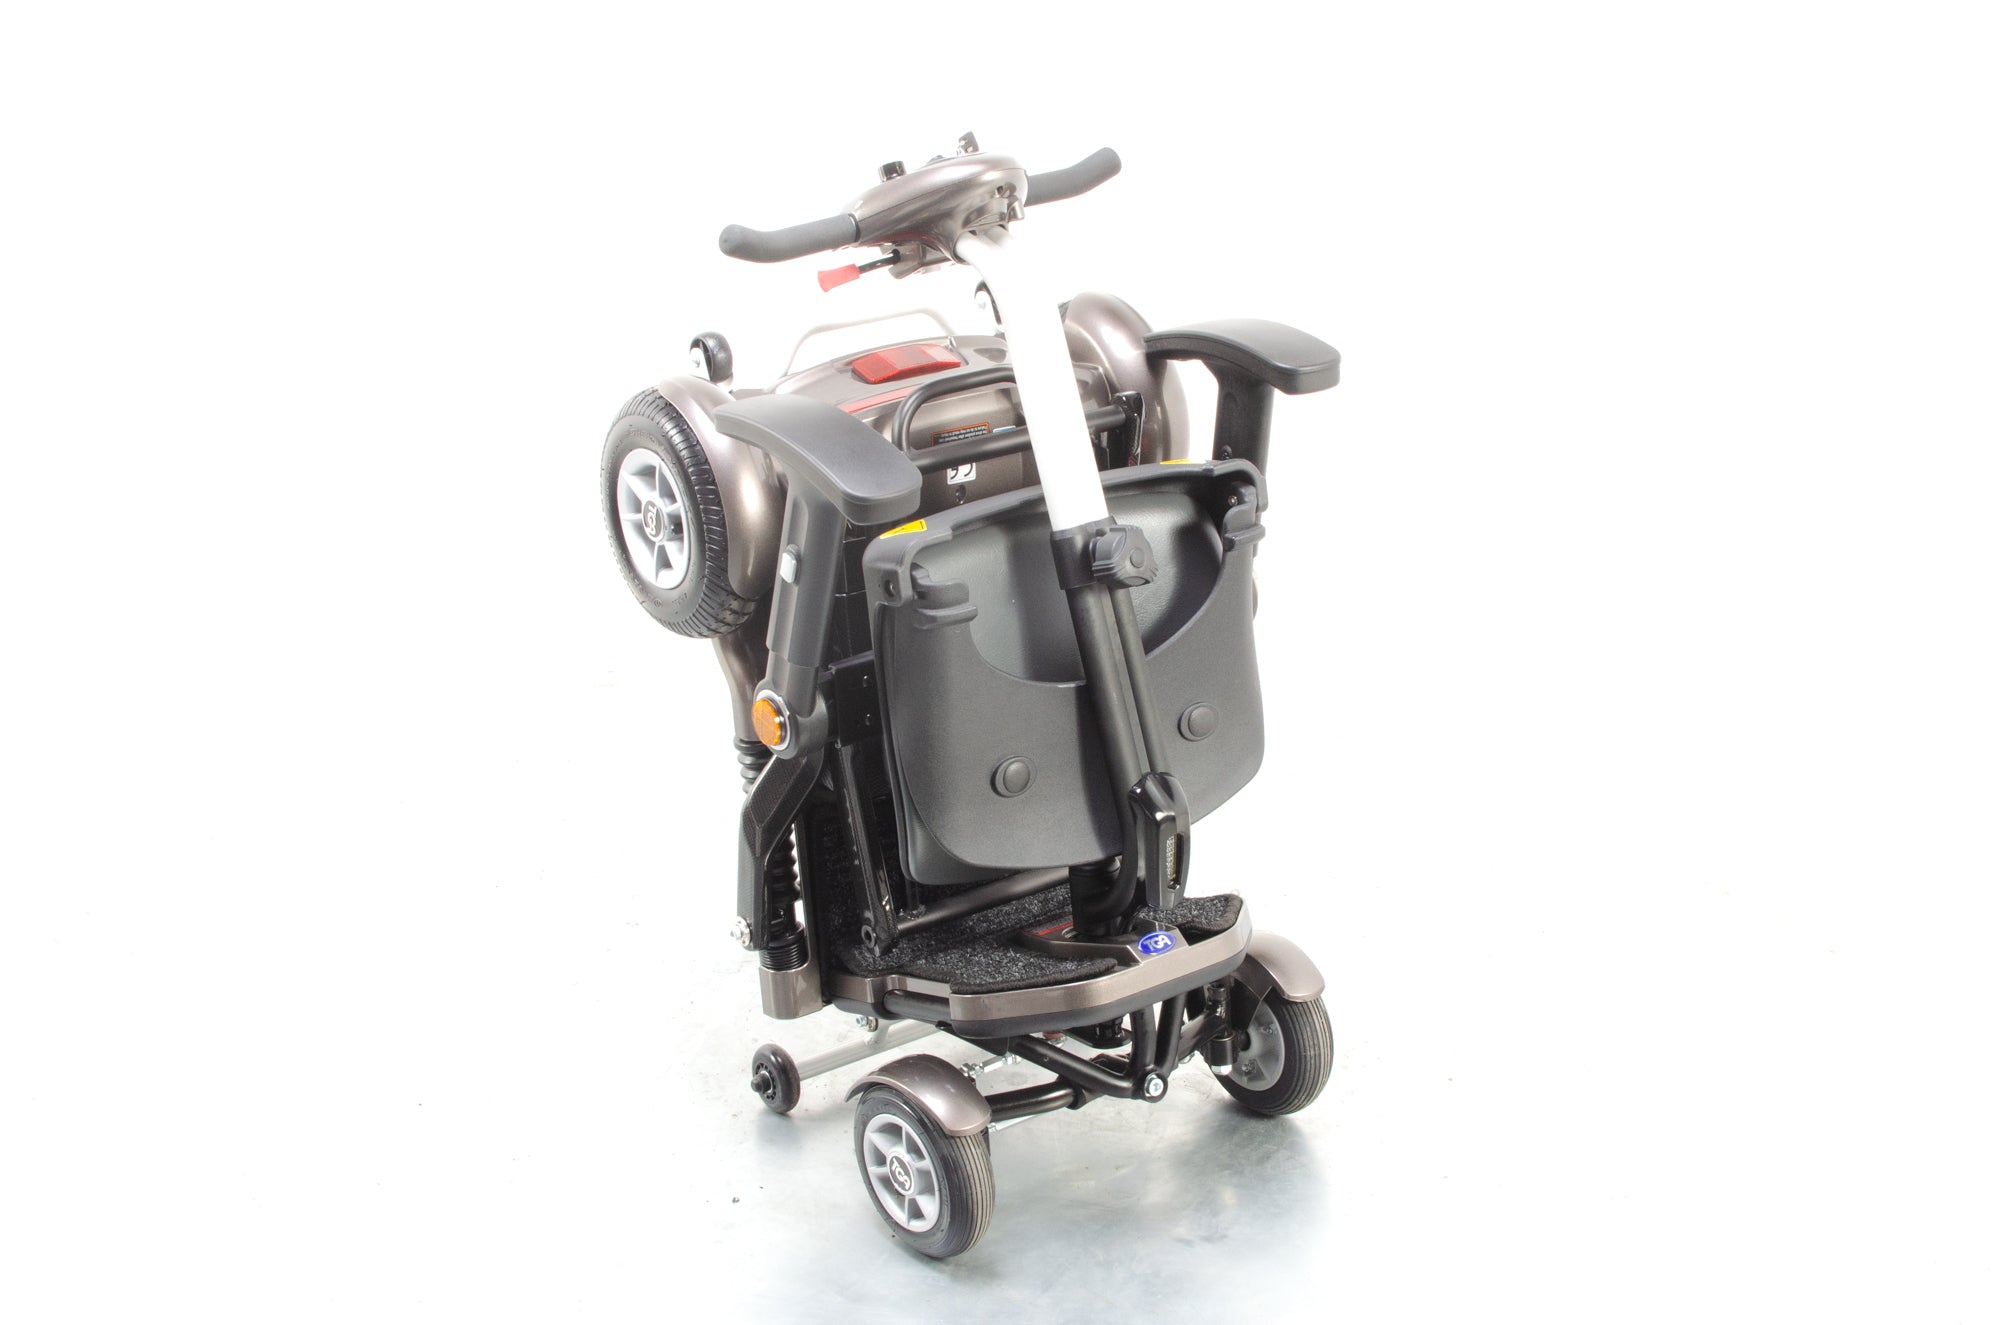 TGA Minimo Plus 4 Used Mobility Scooter Folding Travel Small Lithium Boot